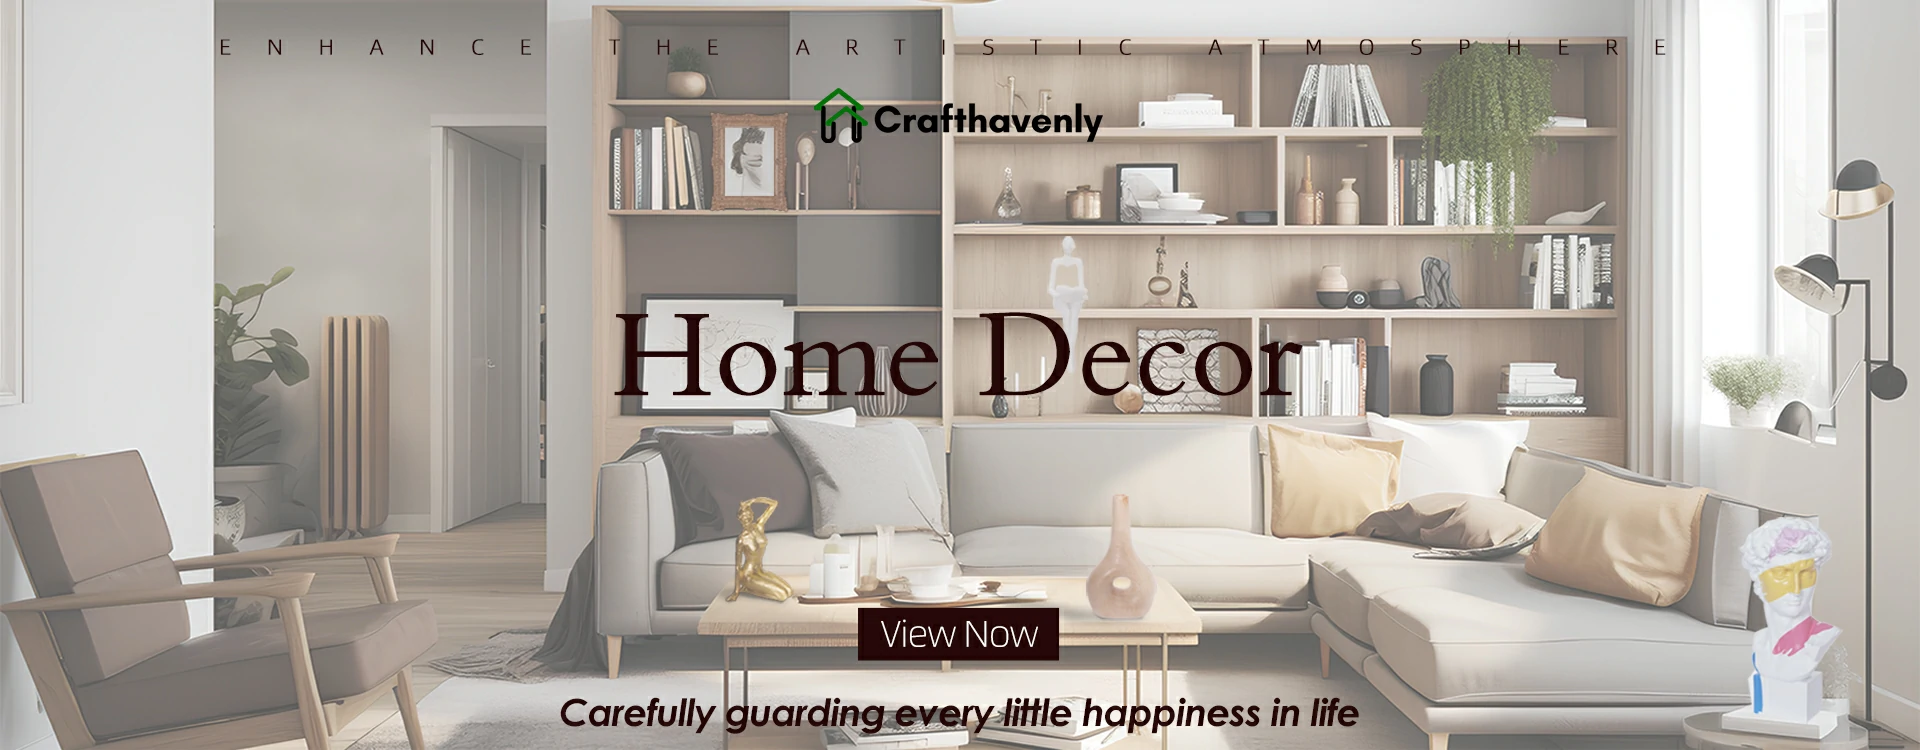 Home Decor Suppliers